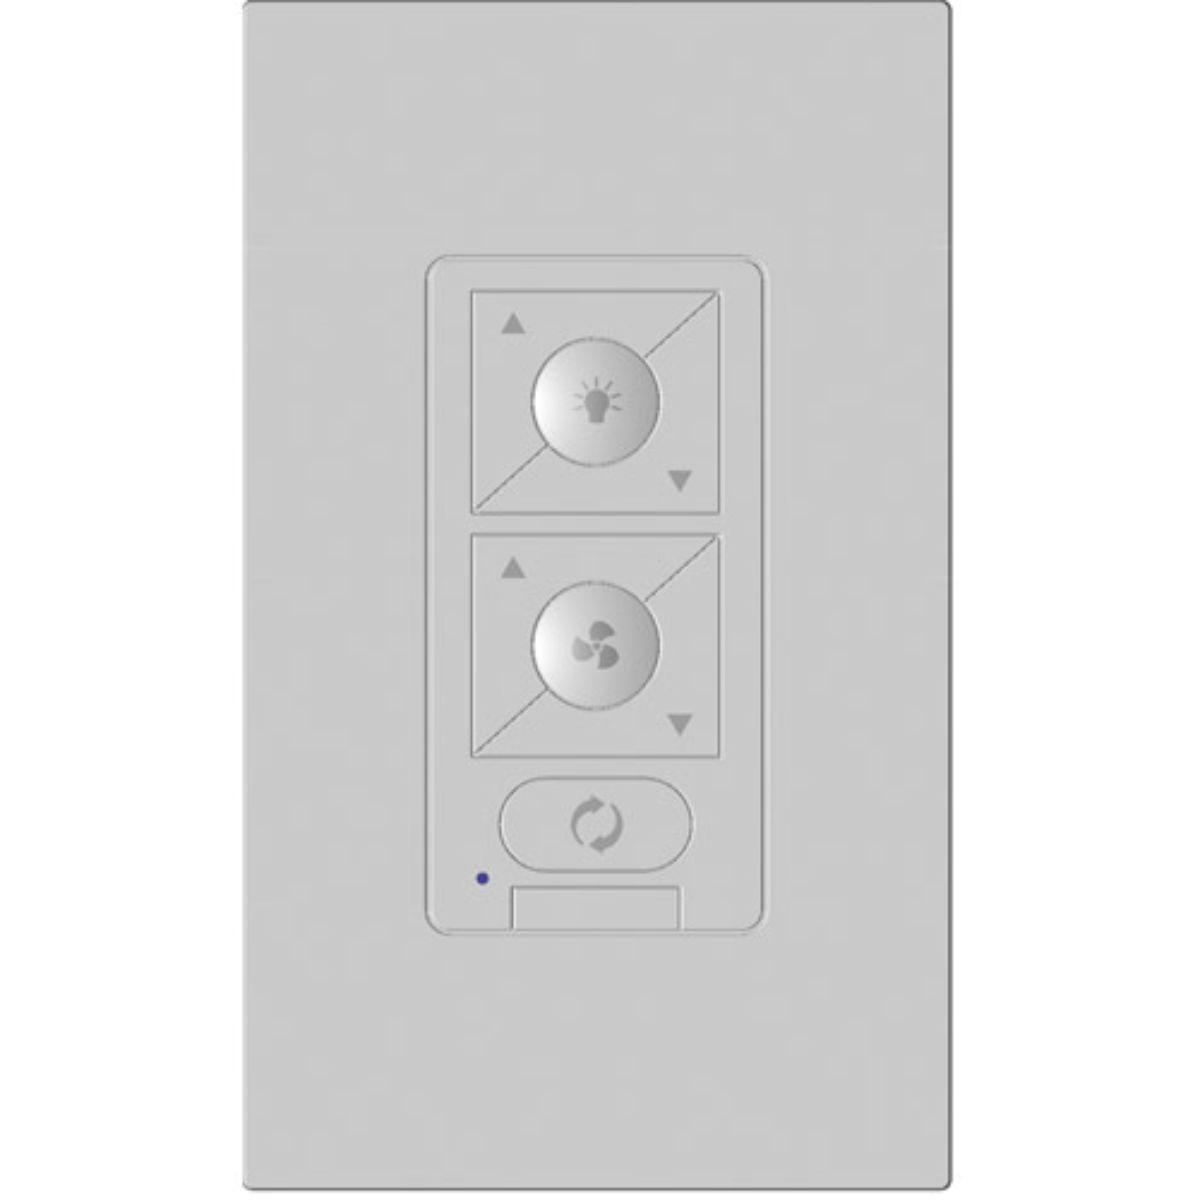 6 speed Ceiling Fan and Light Bluetooth Wall Control, White Finish